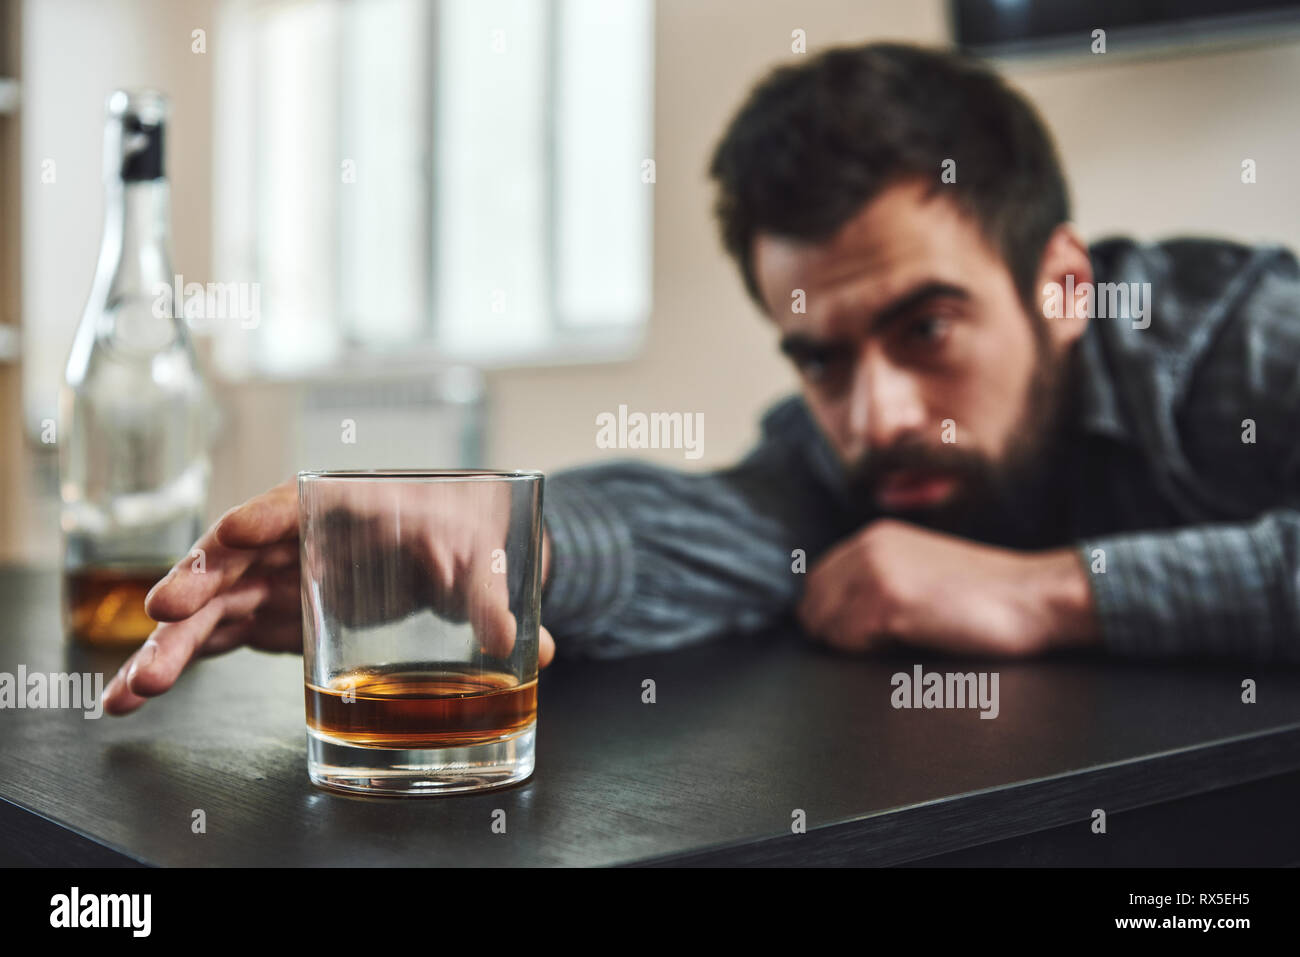 Dark-haired, sad and wasted alcoholic man lying on a table, in the kitchen. He looks at a glass of whiskey and tries to reach it. Looking depressed, l Stock Photo